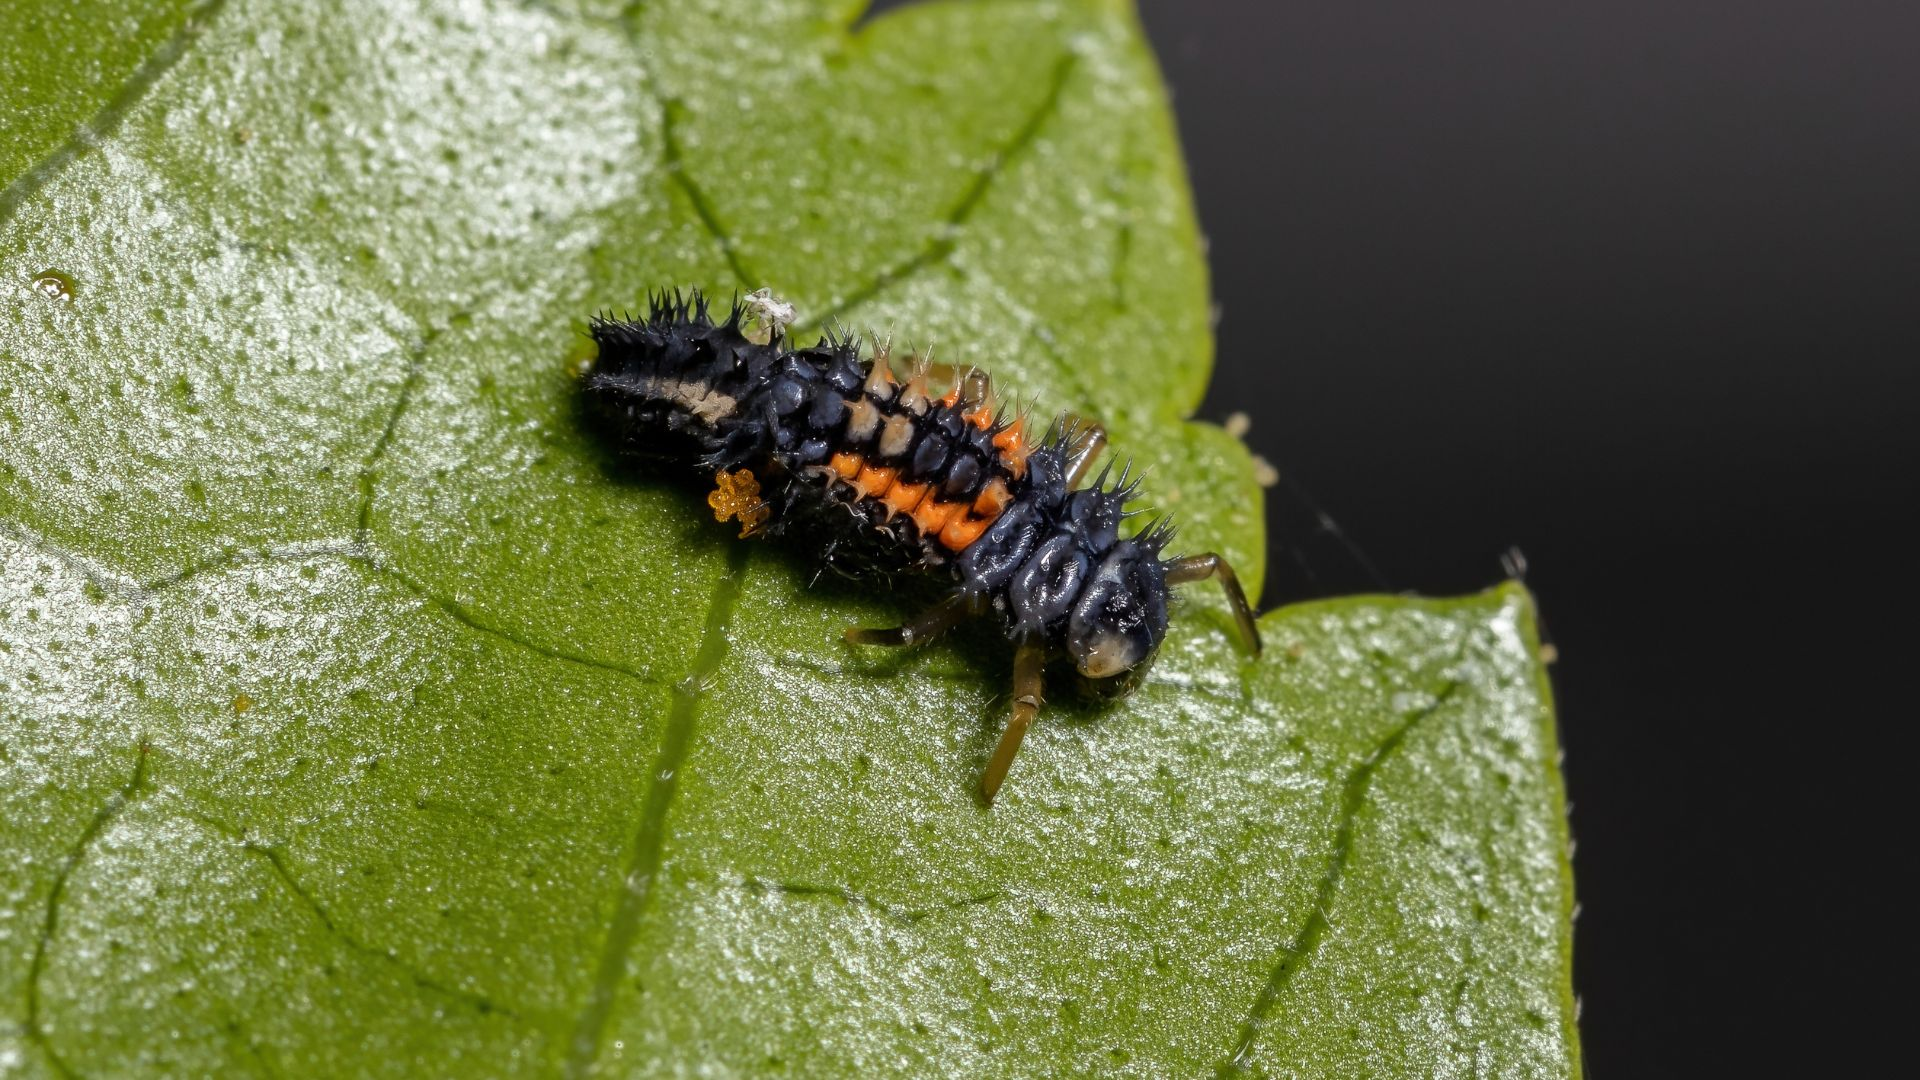 An image of a Asian lady beetle larva on a green leaf.